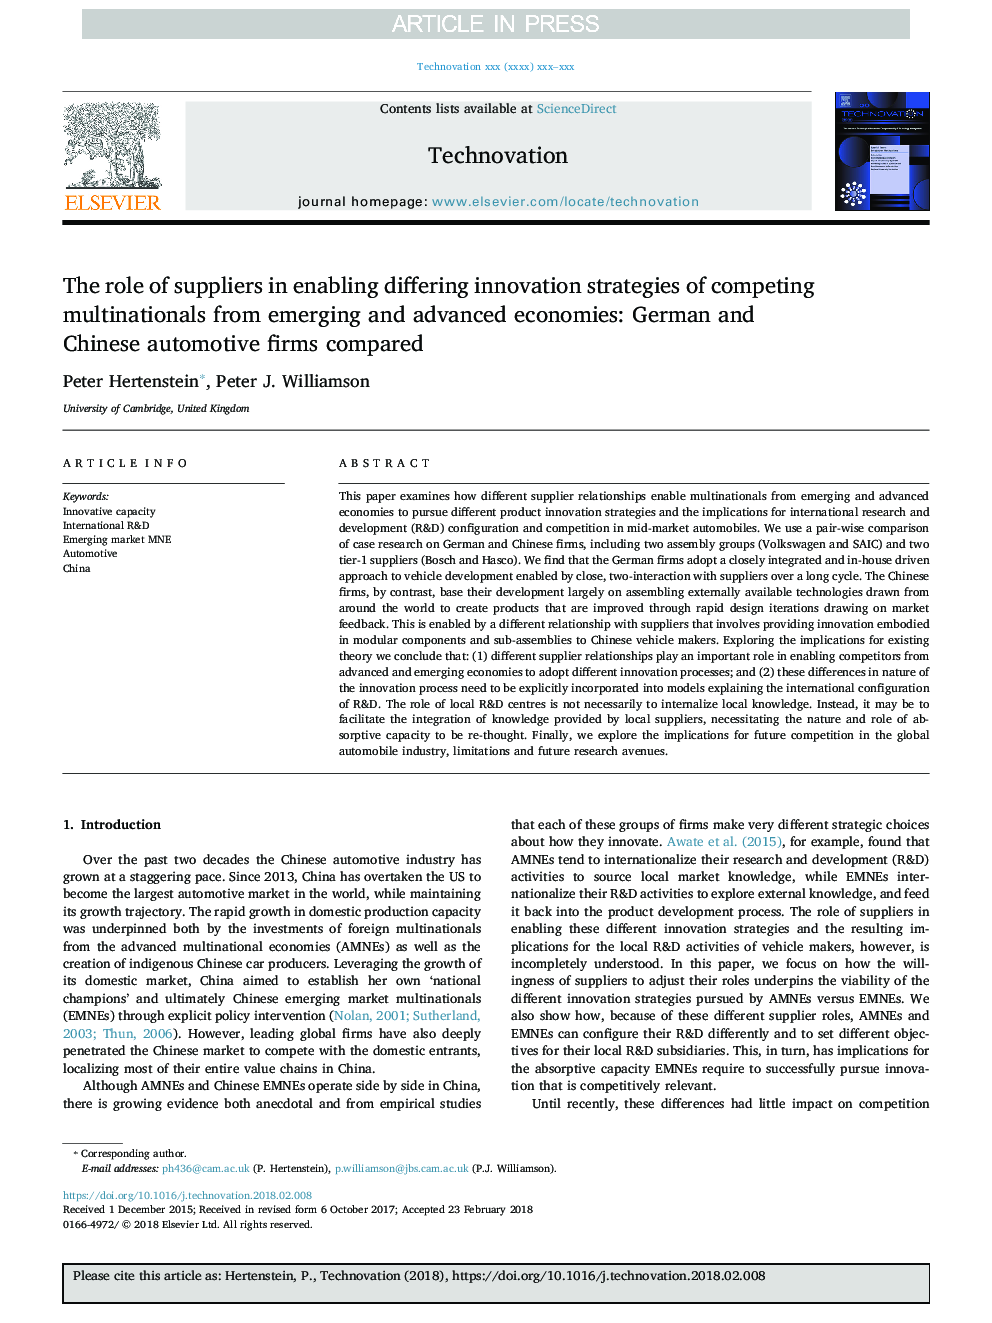 The role of suppliers in enabling differing innovation strategies of competing multinationals from emerging and advanced economies: German and Chinese automotive firms compared